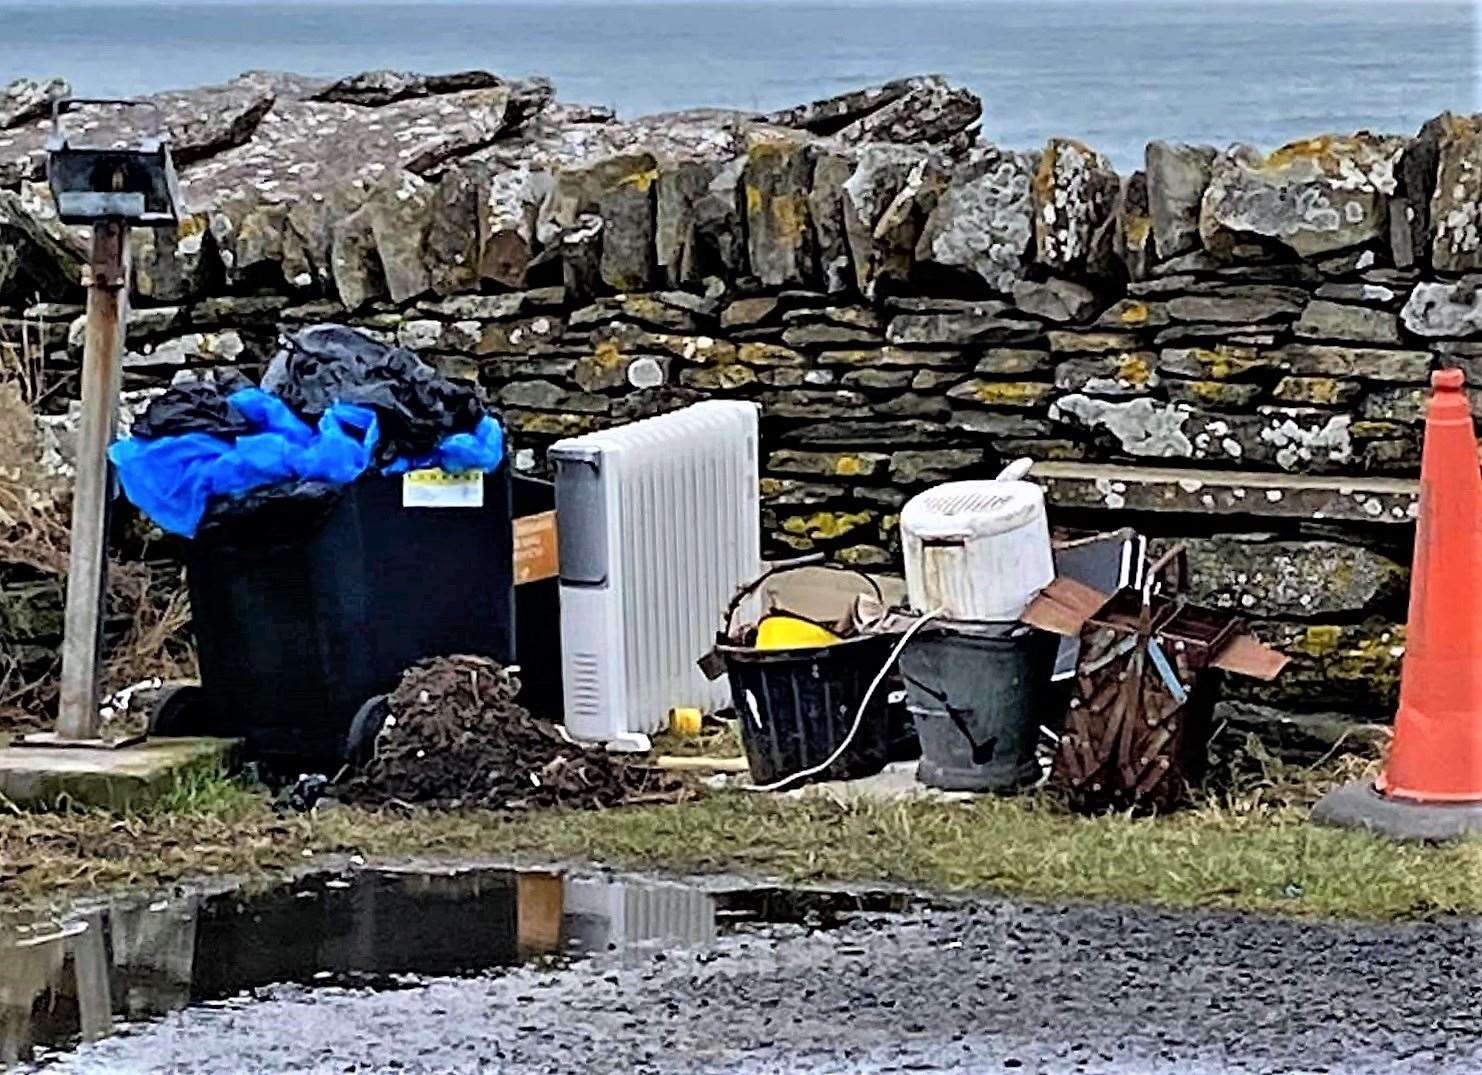 This picture of fly-tipping at the Trinkie area near Wick had local people respond with anger when shared on social media.